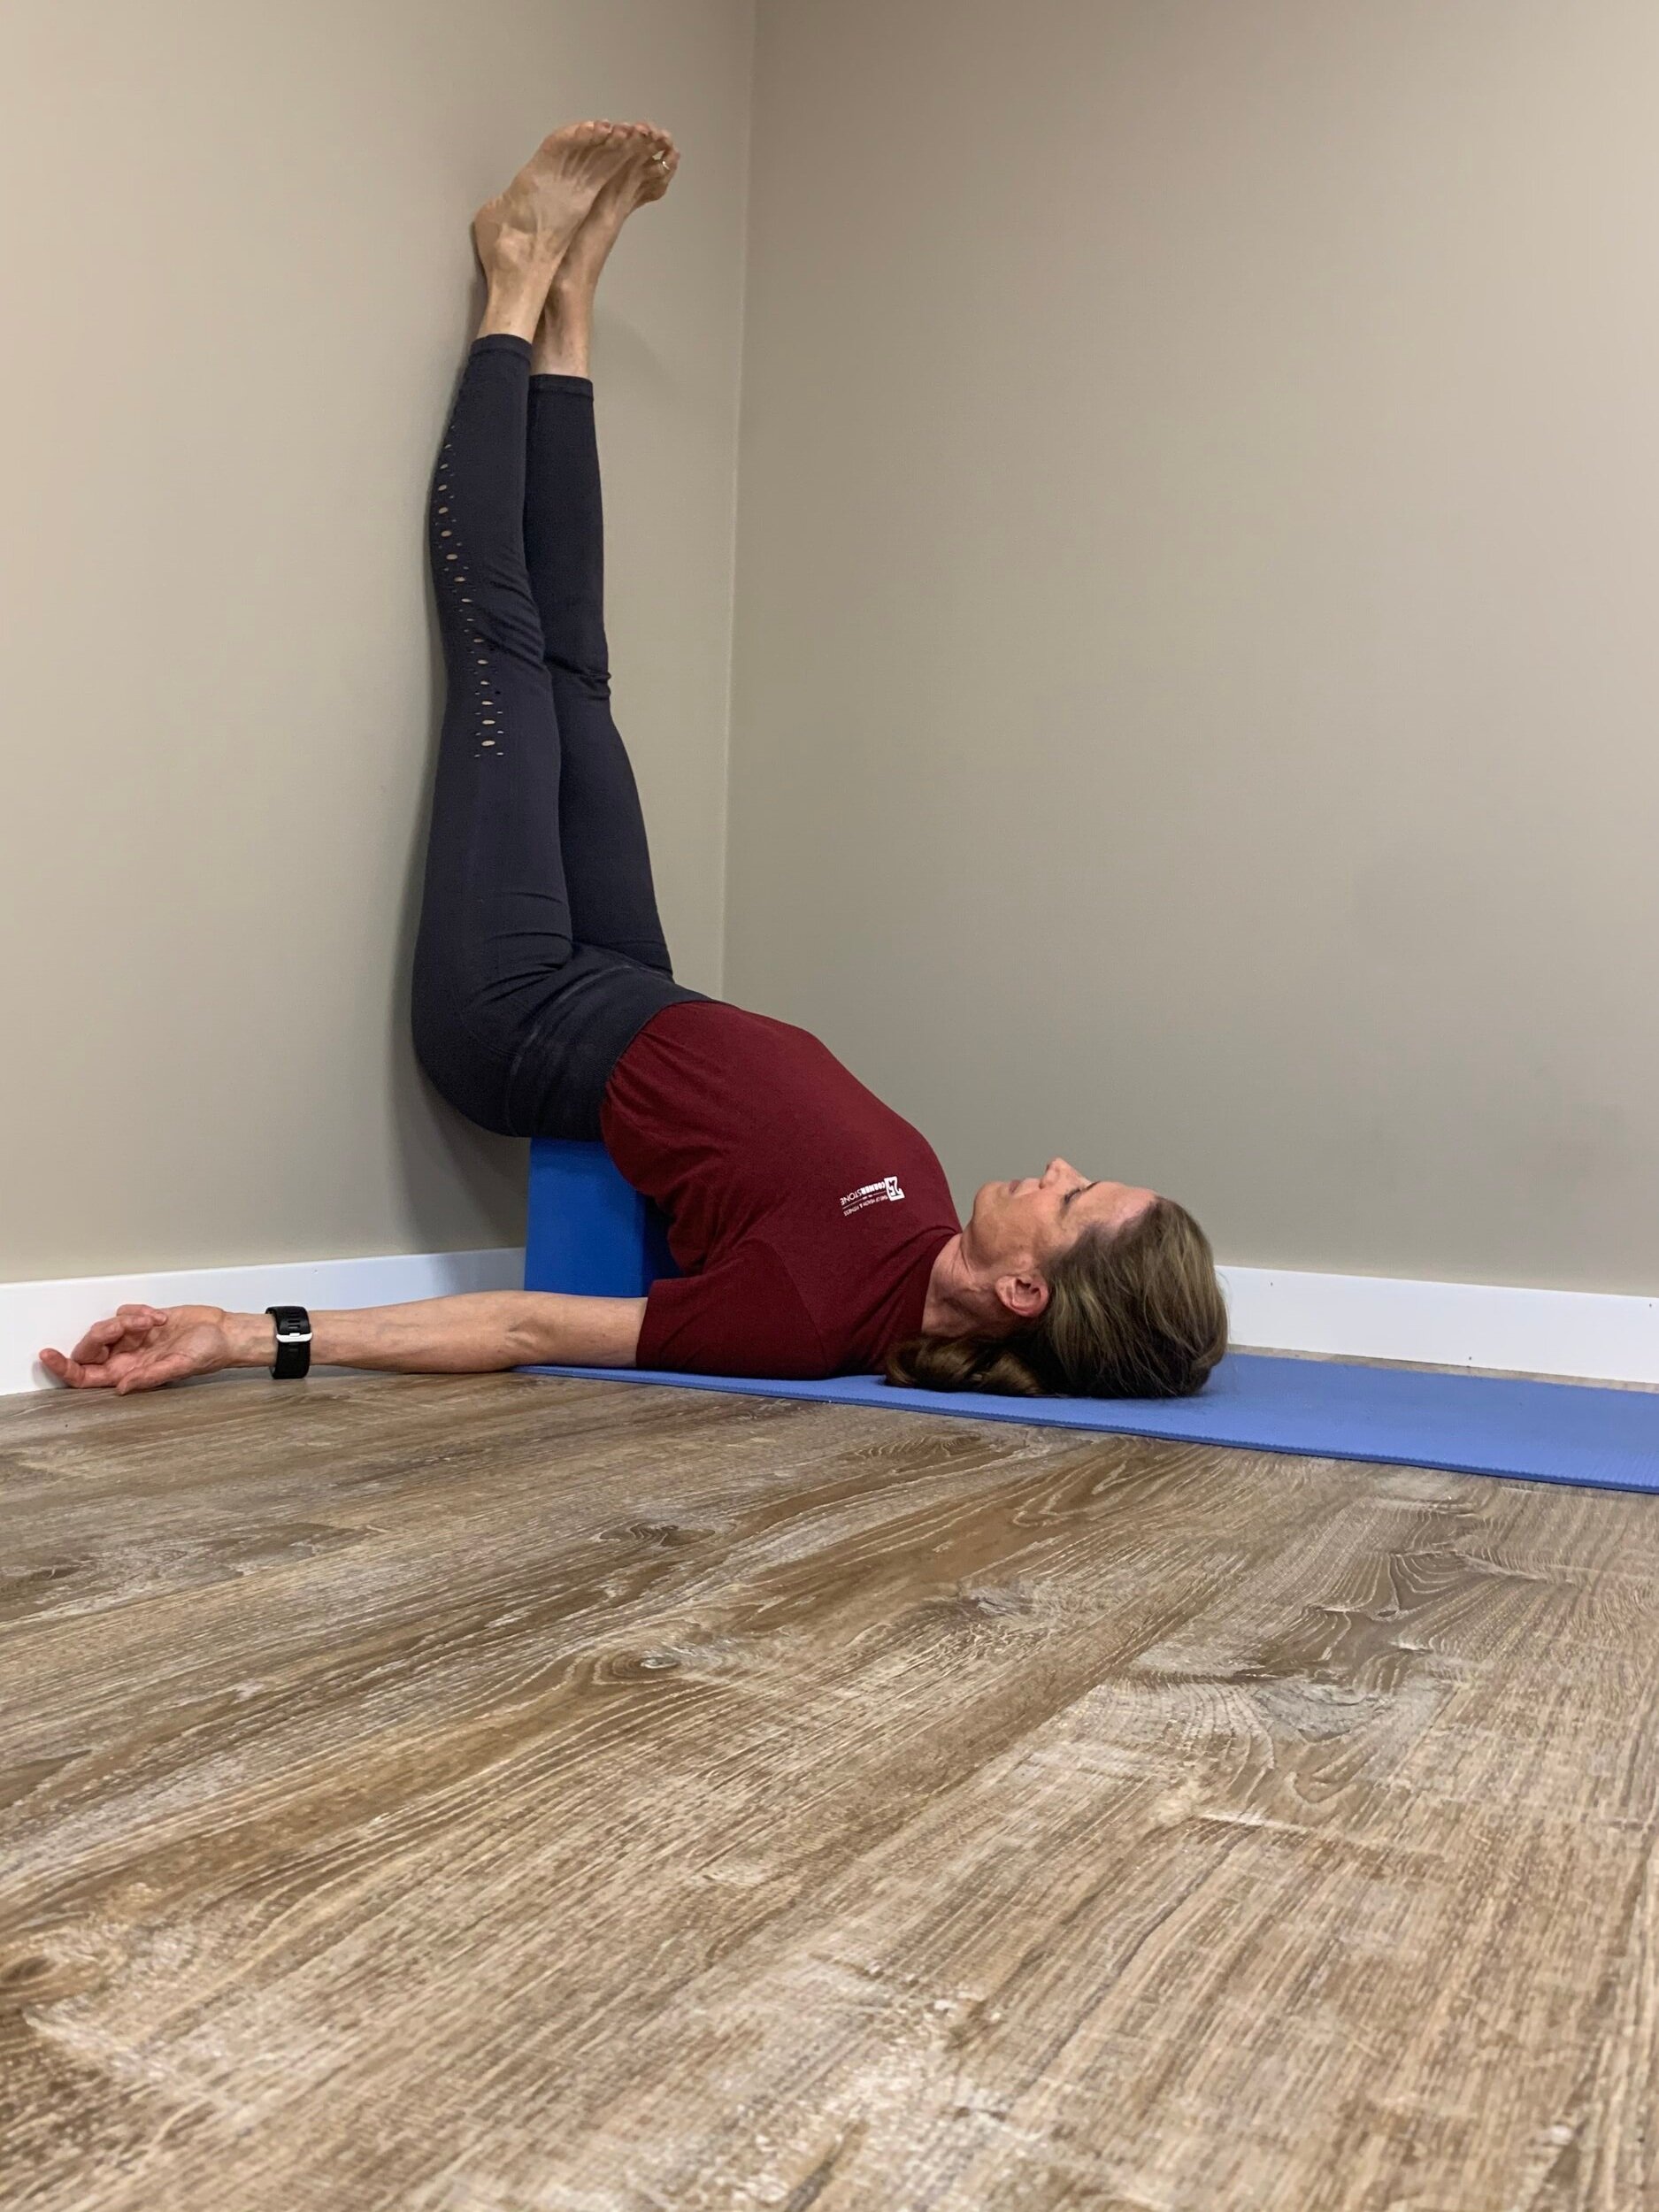 Benefits of Sarvangasana (Shoulder Stand) And How To Do It